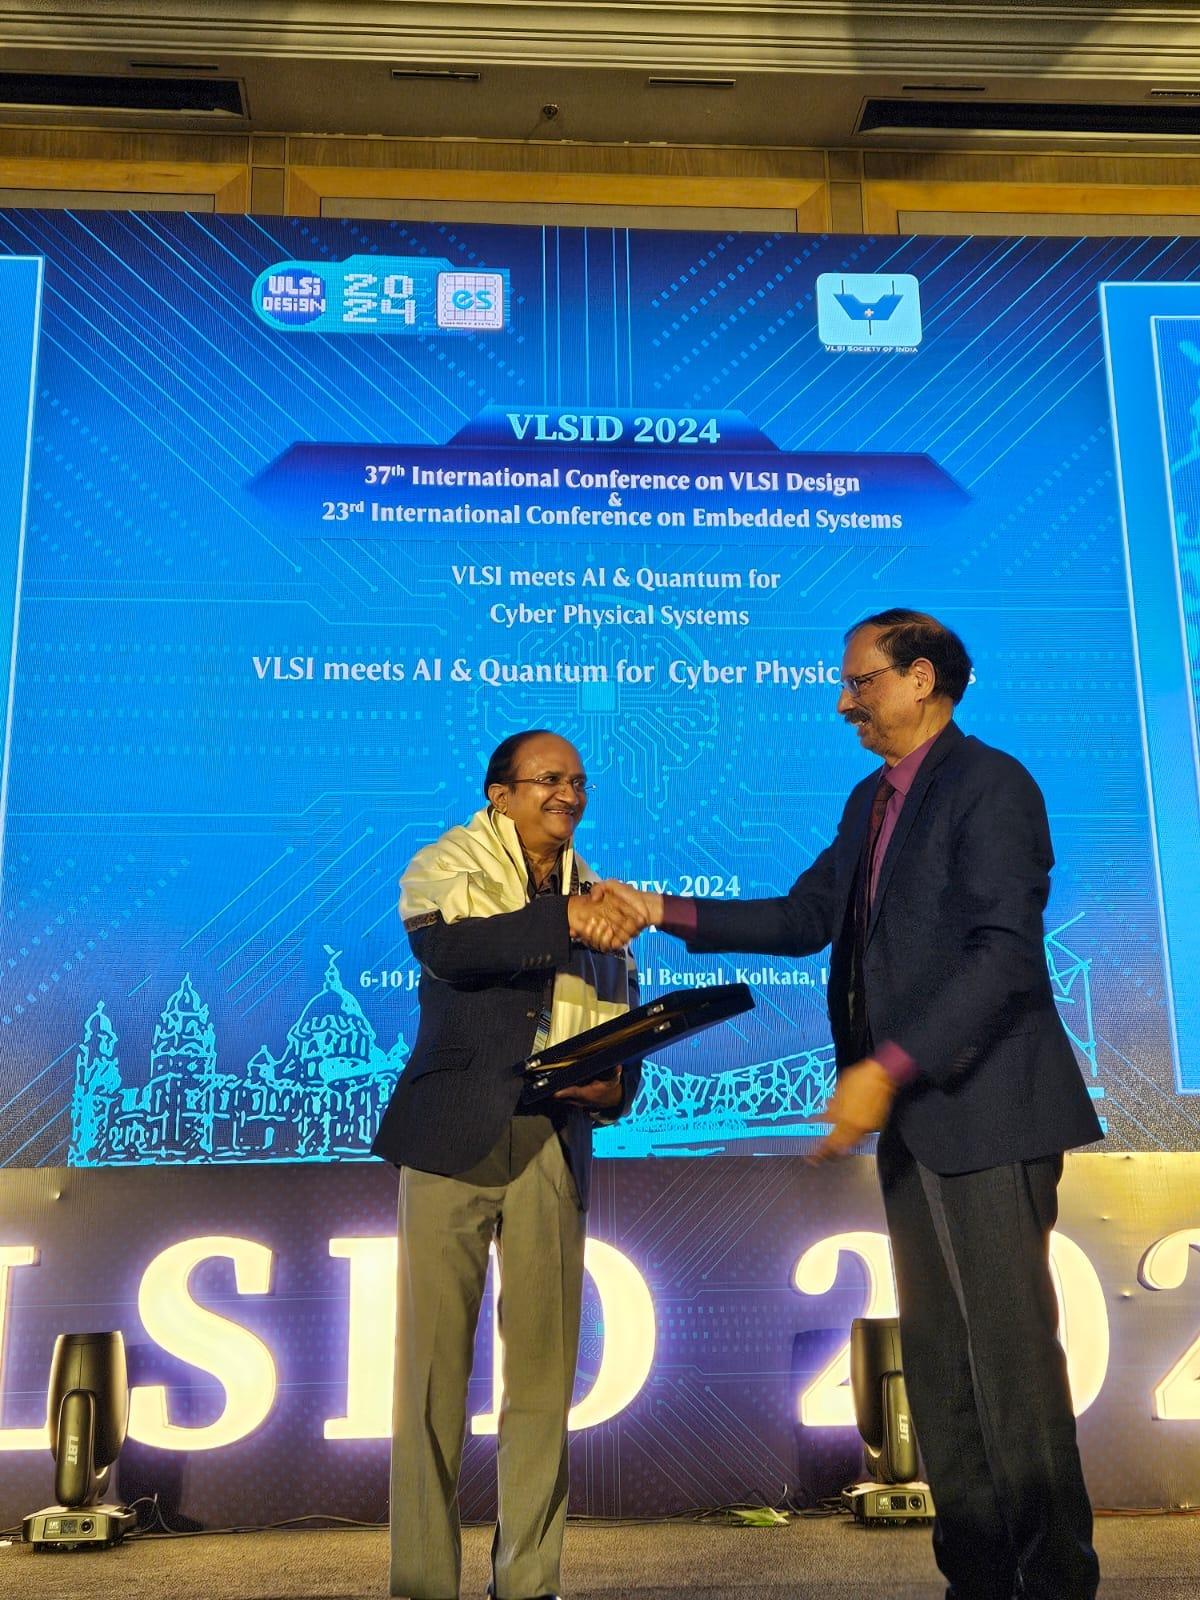 BITS Pilani VC Prof. Ramgopal Rao gets VLSI Lifetime Achievement Award 2024 at the 37th International VLSI Design Conference 2024 held in Kolkata, during January 6-10, 2024 presented by the VLSI Society of India